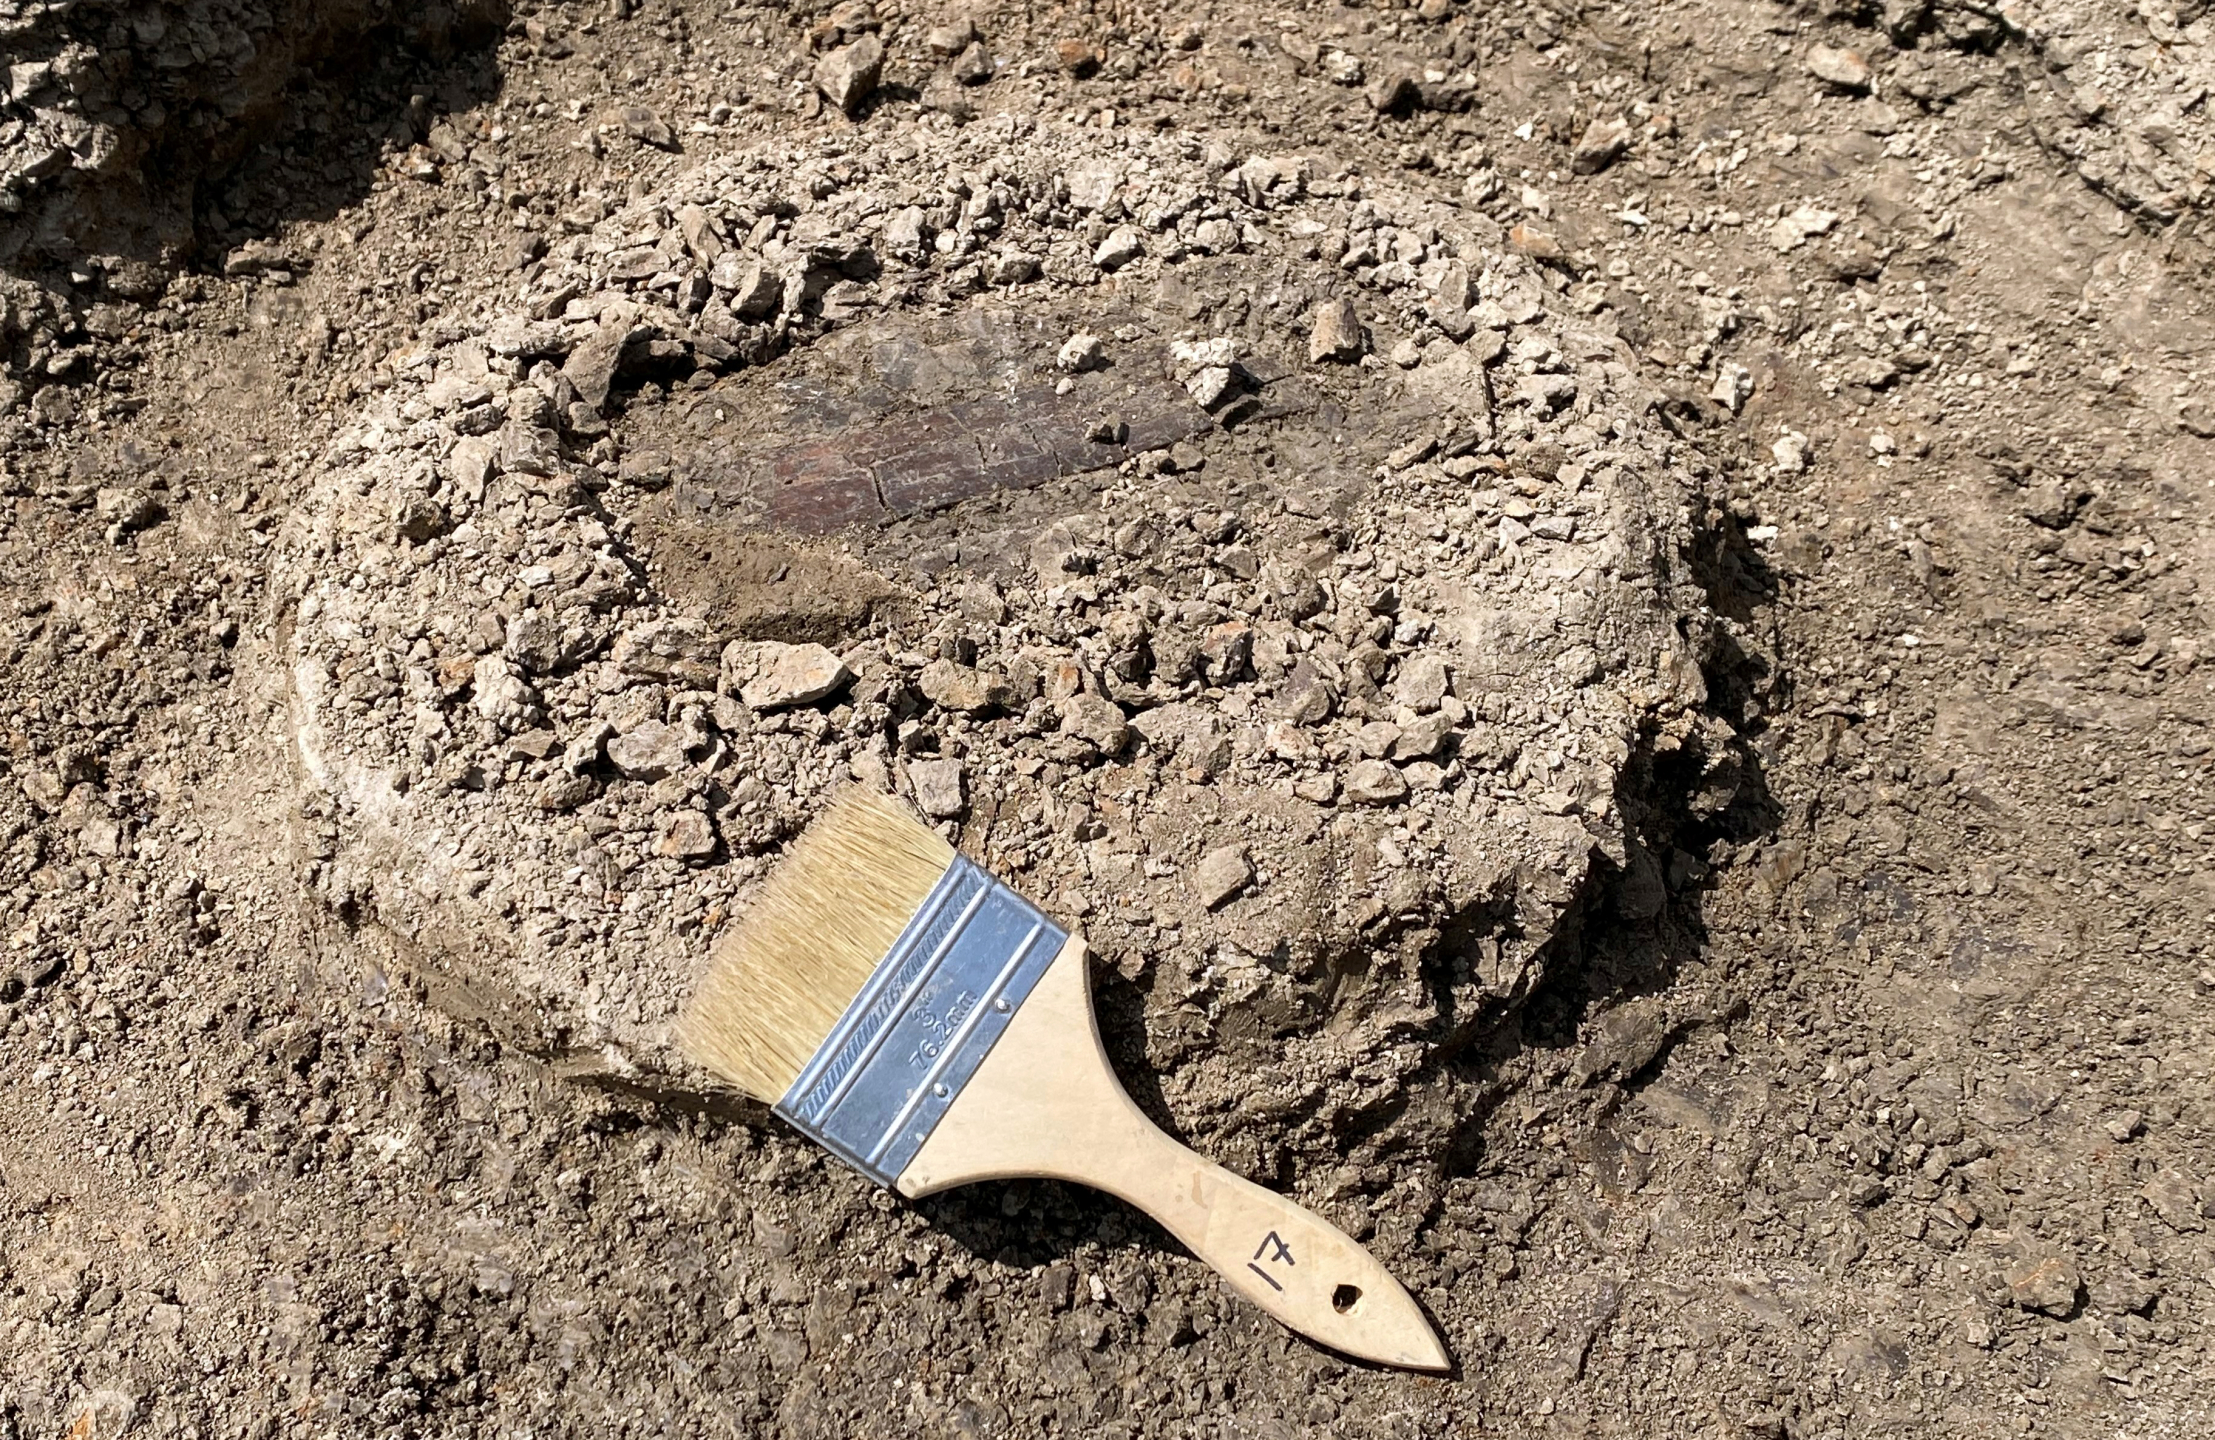 A photo of a brown dinosaur bone fossil in a mound of dirt next to a paintbrush.